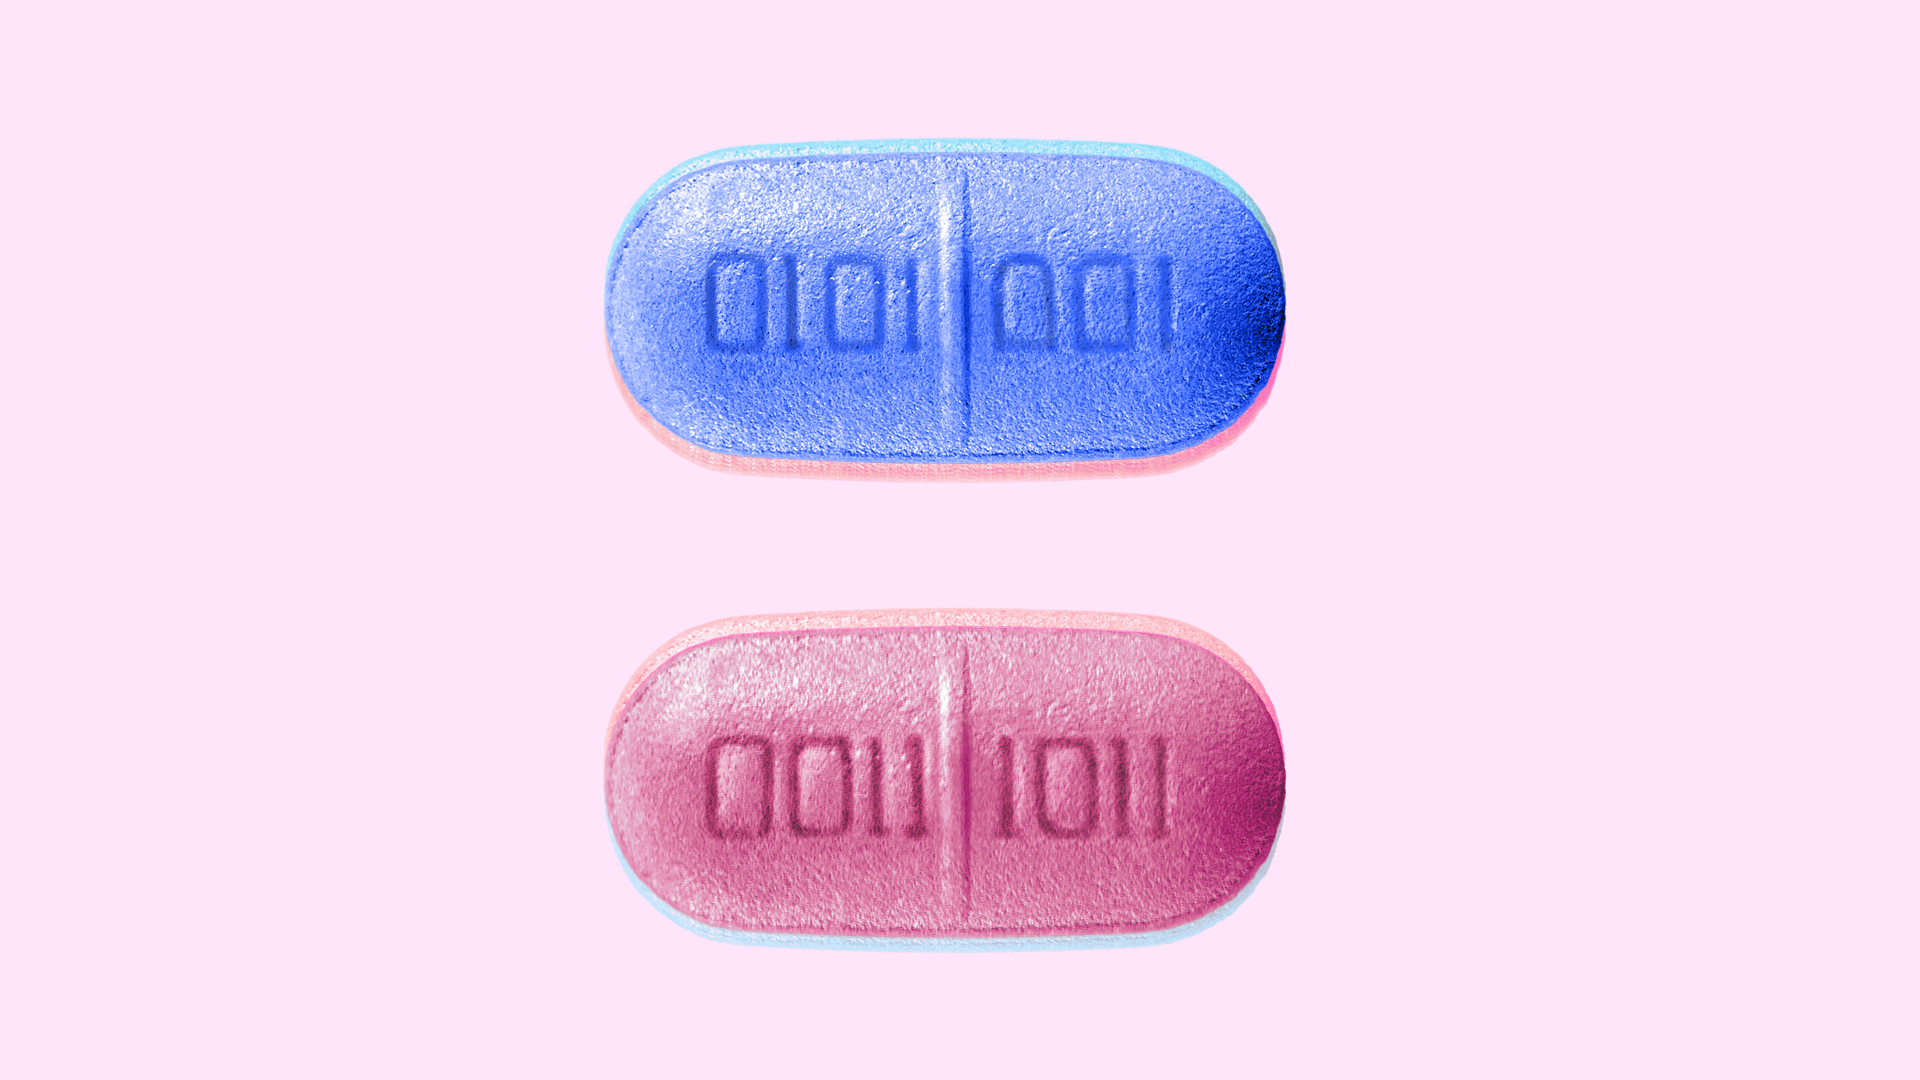 A photo of pills with numbers on them.